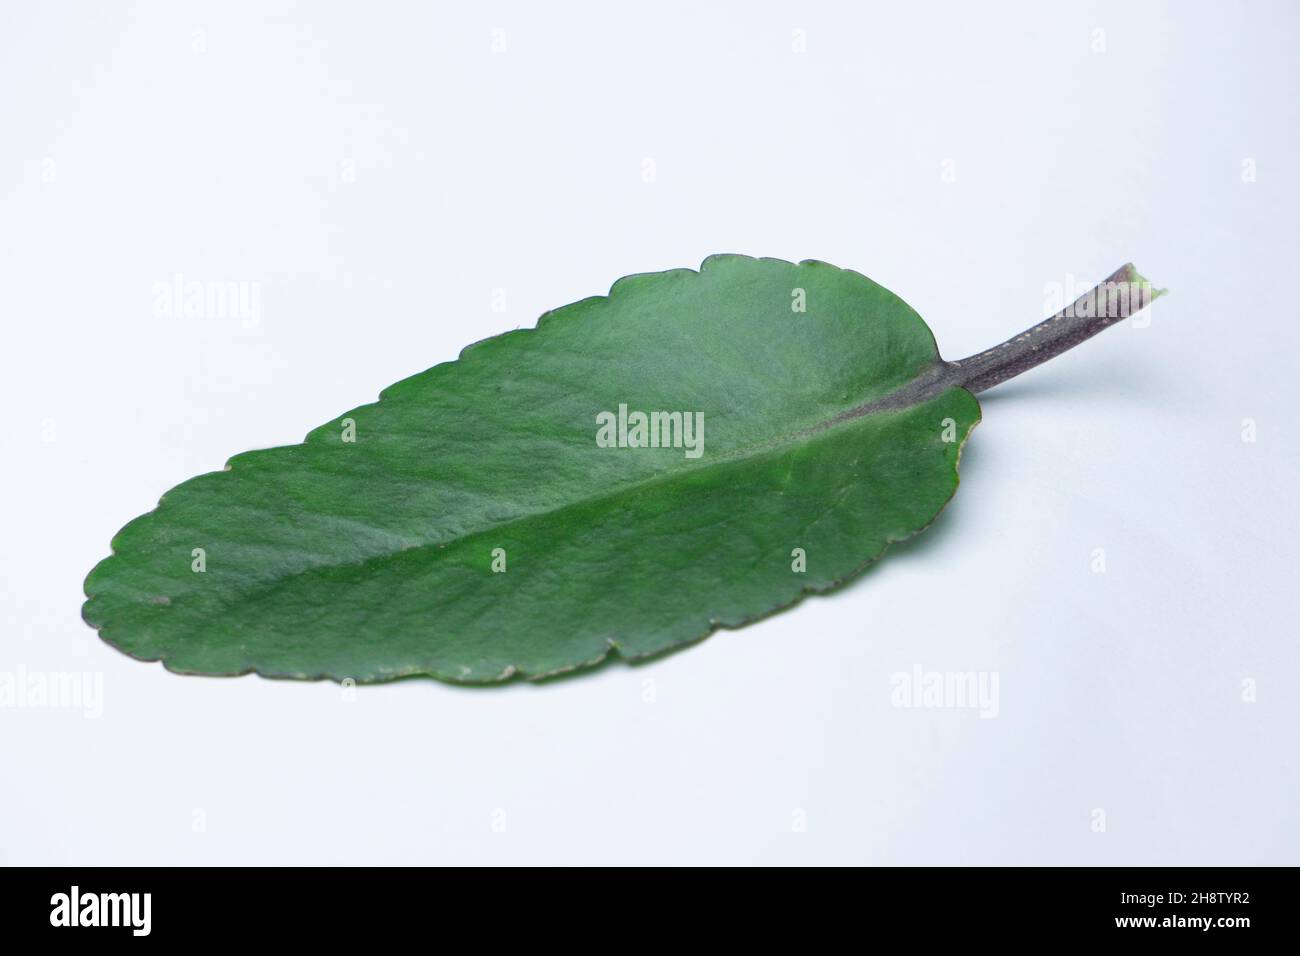 Leaf of air plant or miracle leaf, Bryophyllum pinnatum. Commonly known as Pattharcaṭṭa in Indian traditional systems of medicine Stock Photo